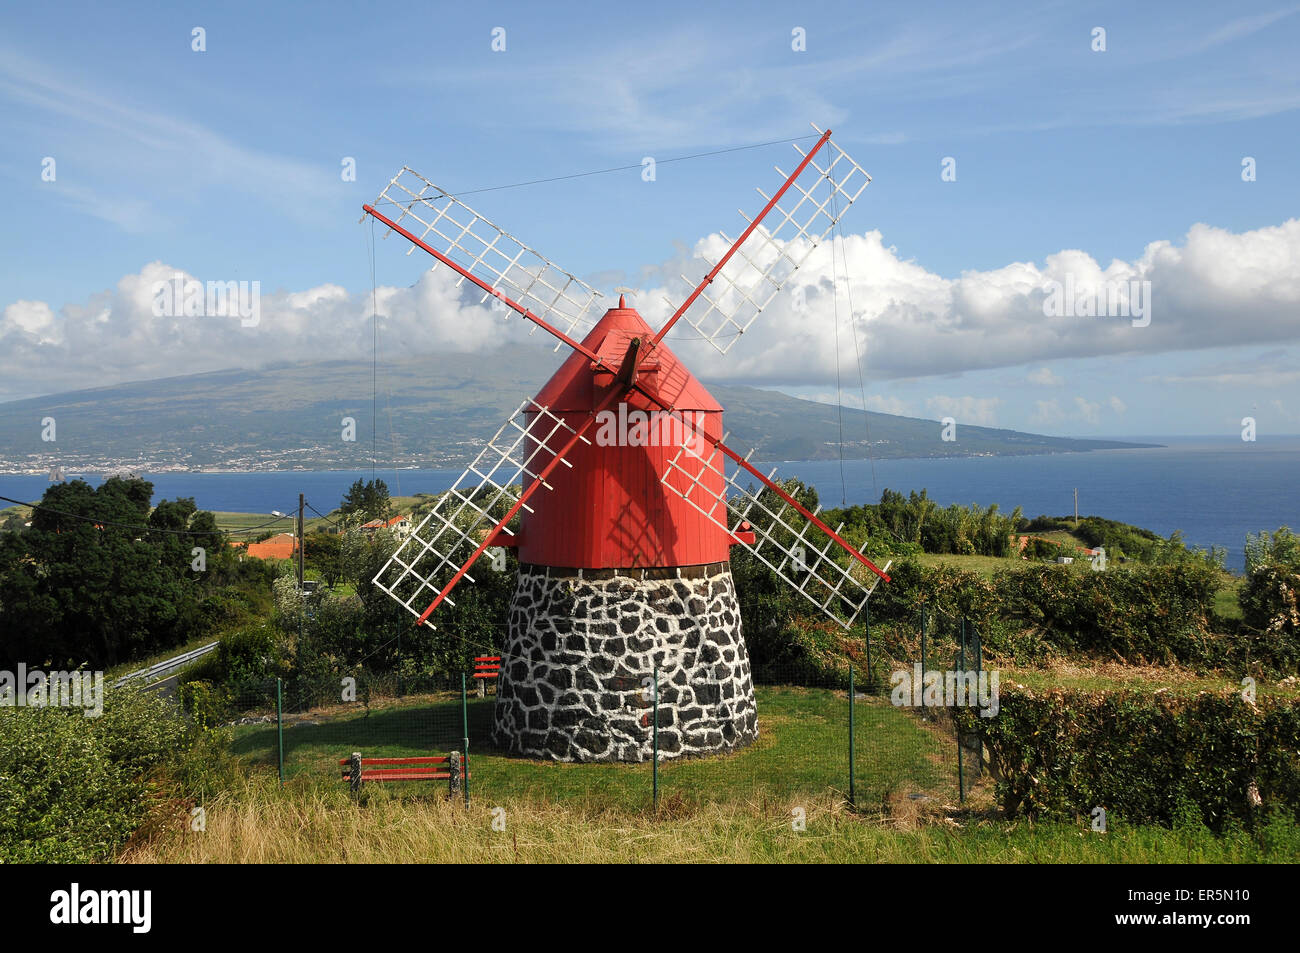 Windmill over Praia do Almoxarife with Pico Vulcano in the background, Island of Faial, Azores, Portugal Stock Photo